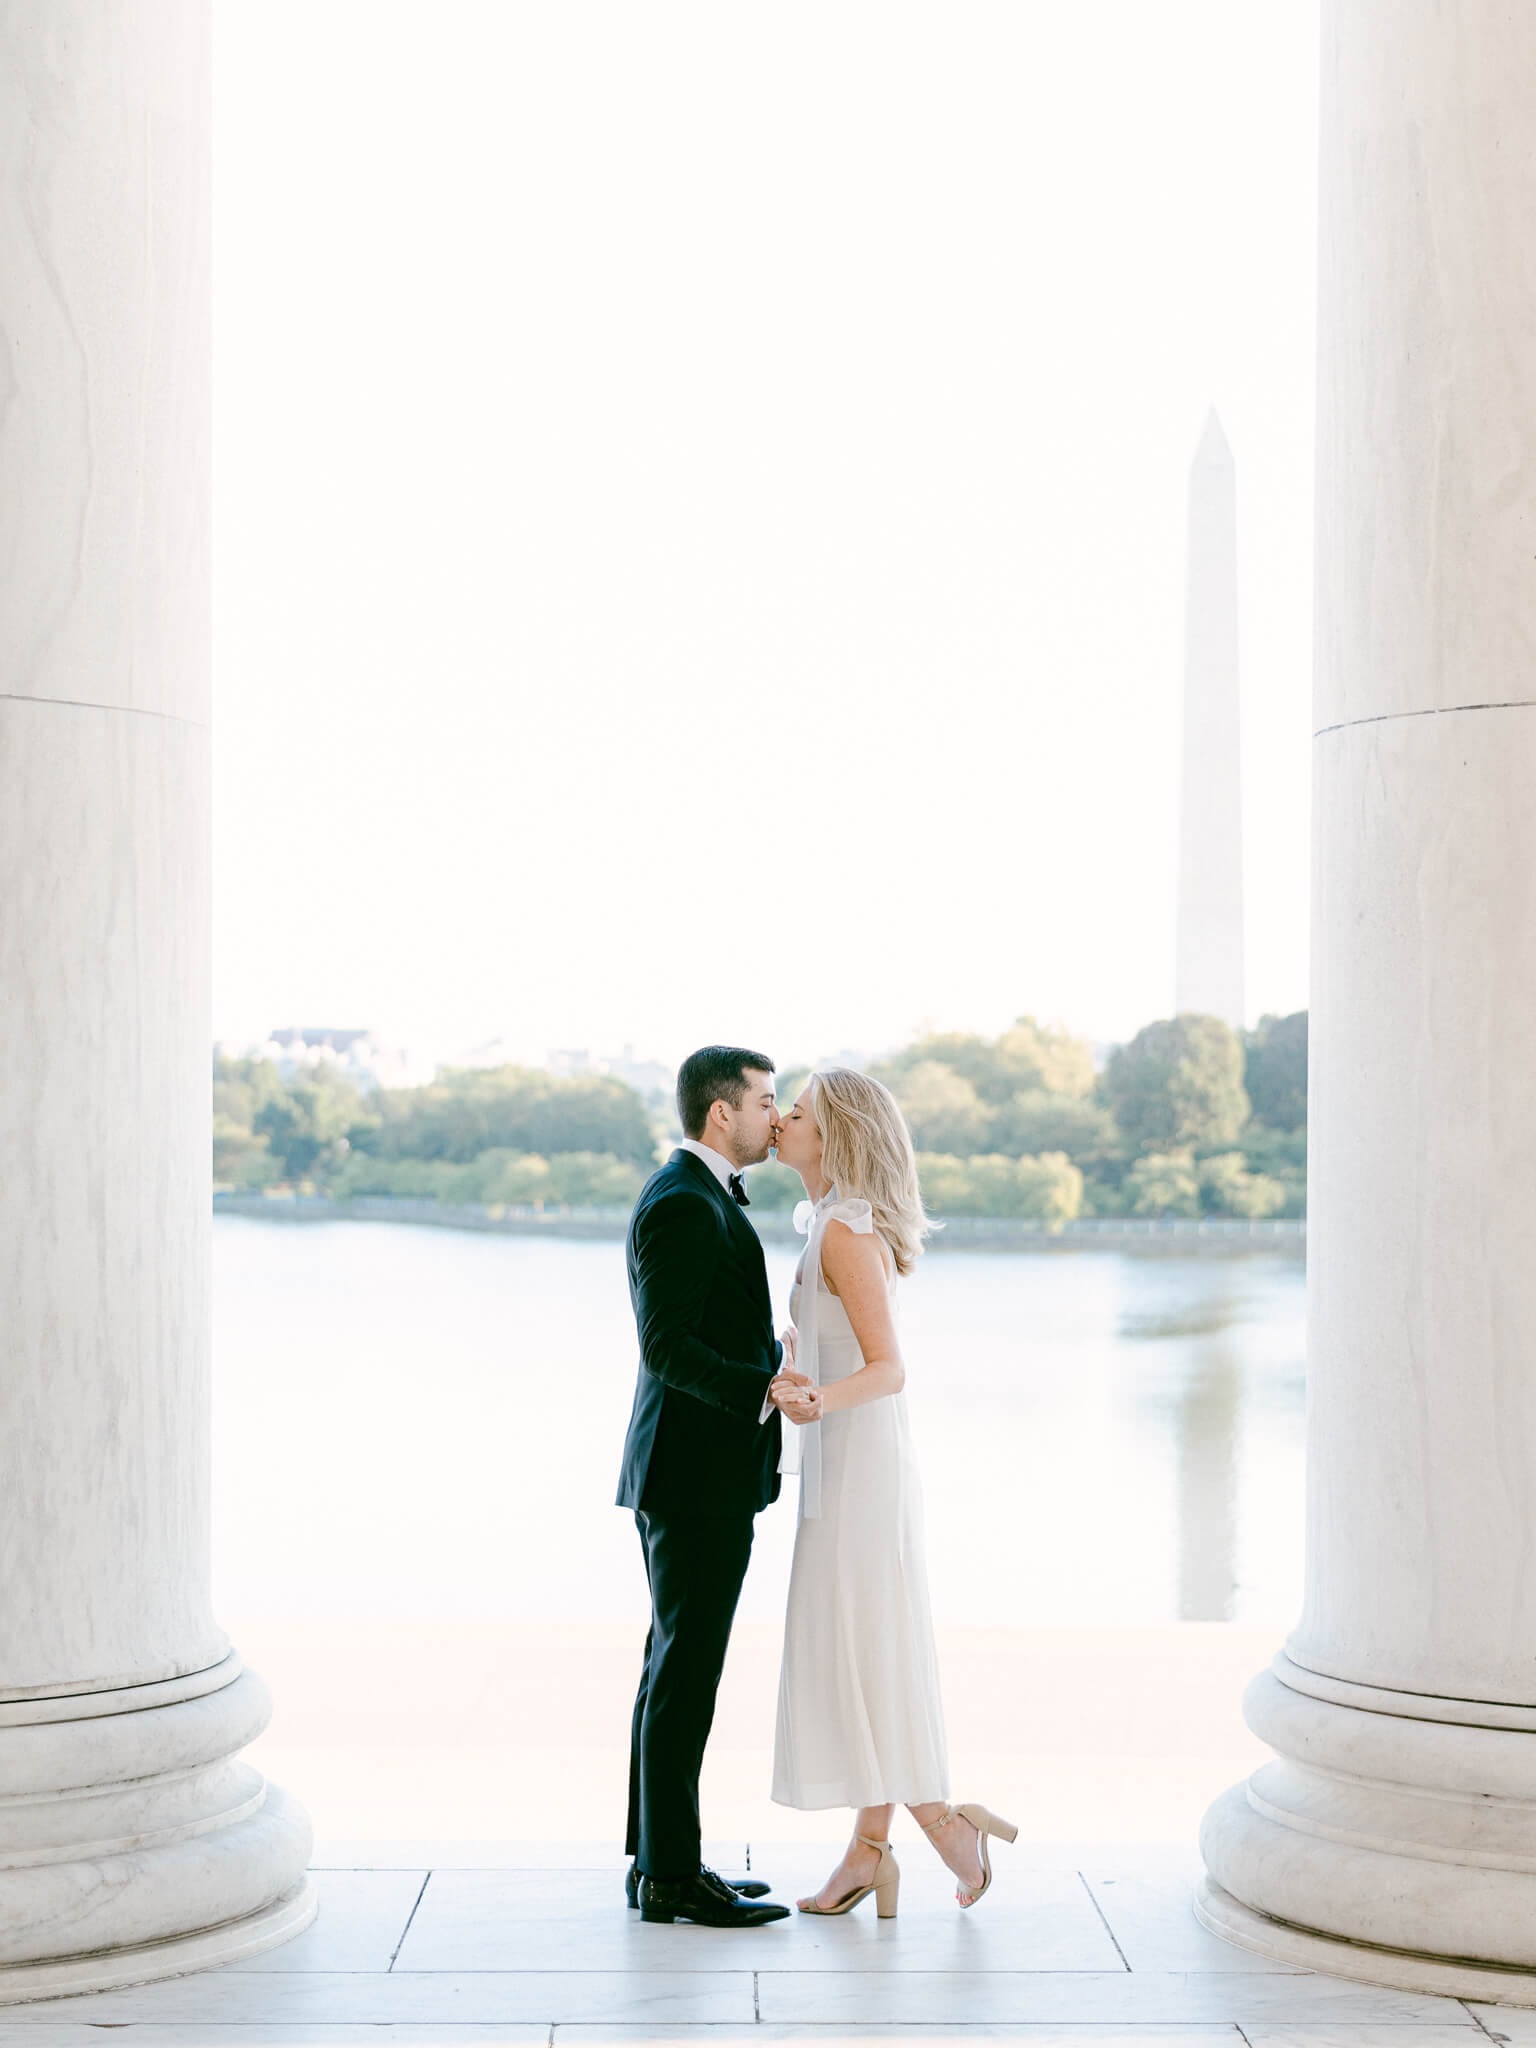 An engaged couple kissing between the columns of the Jefferson Memorial in Washington, D.C.